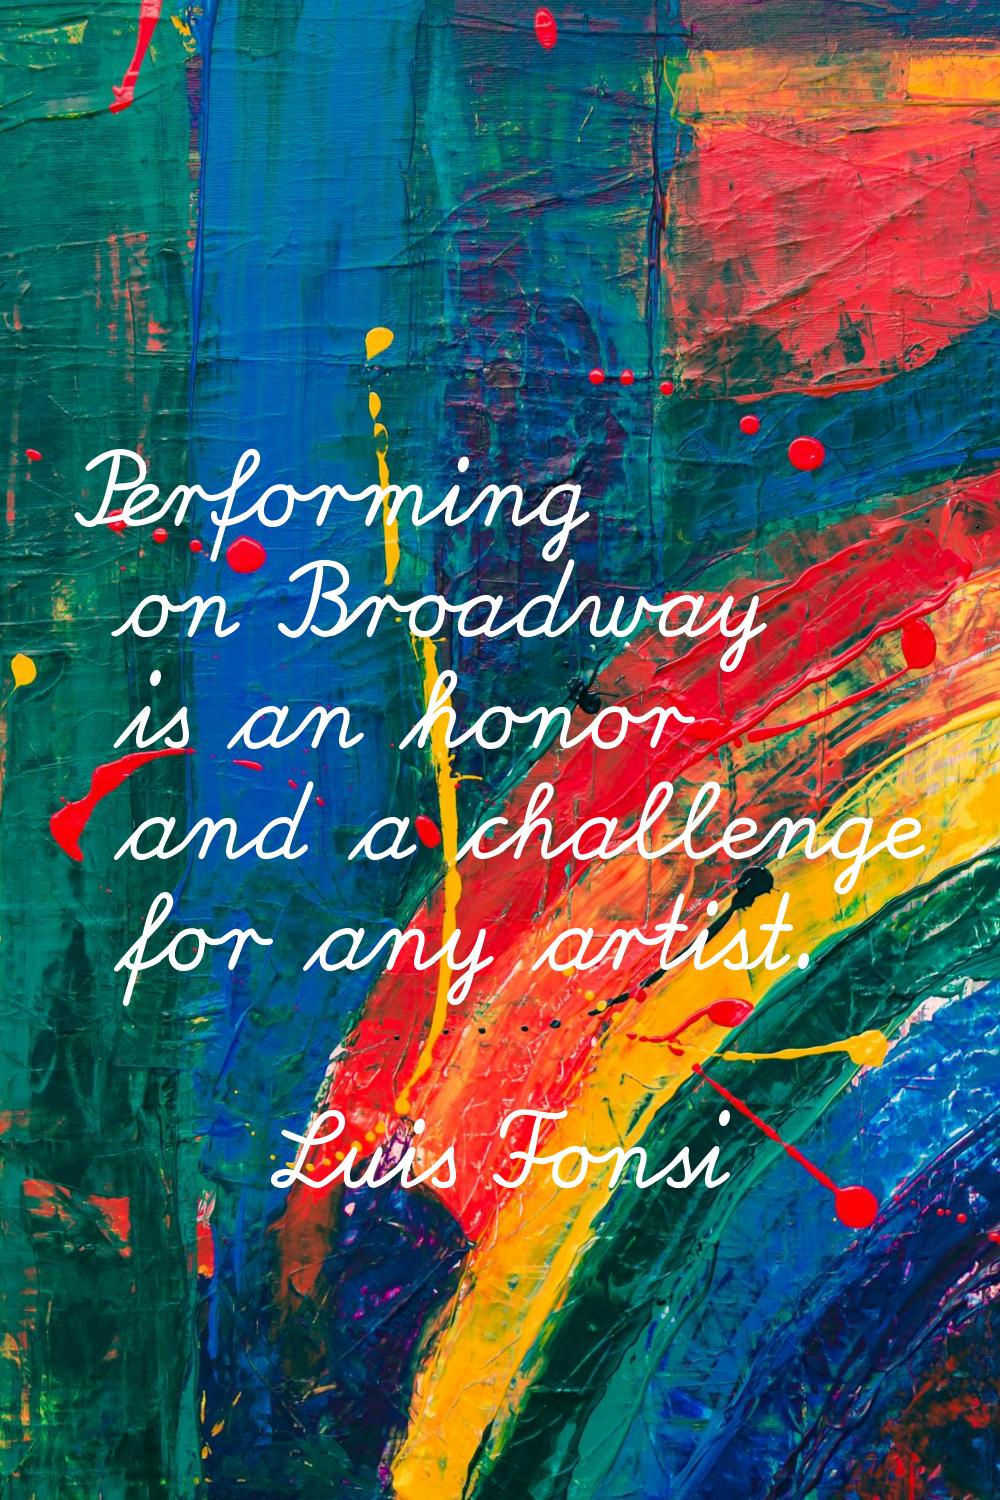 Performing on Broadway is an honor and a challenge for any artist.